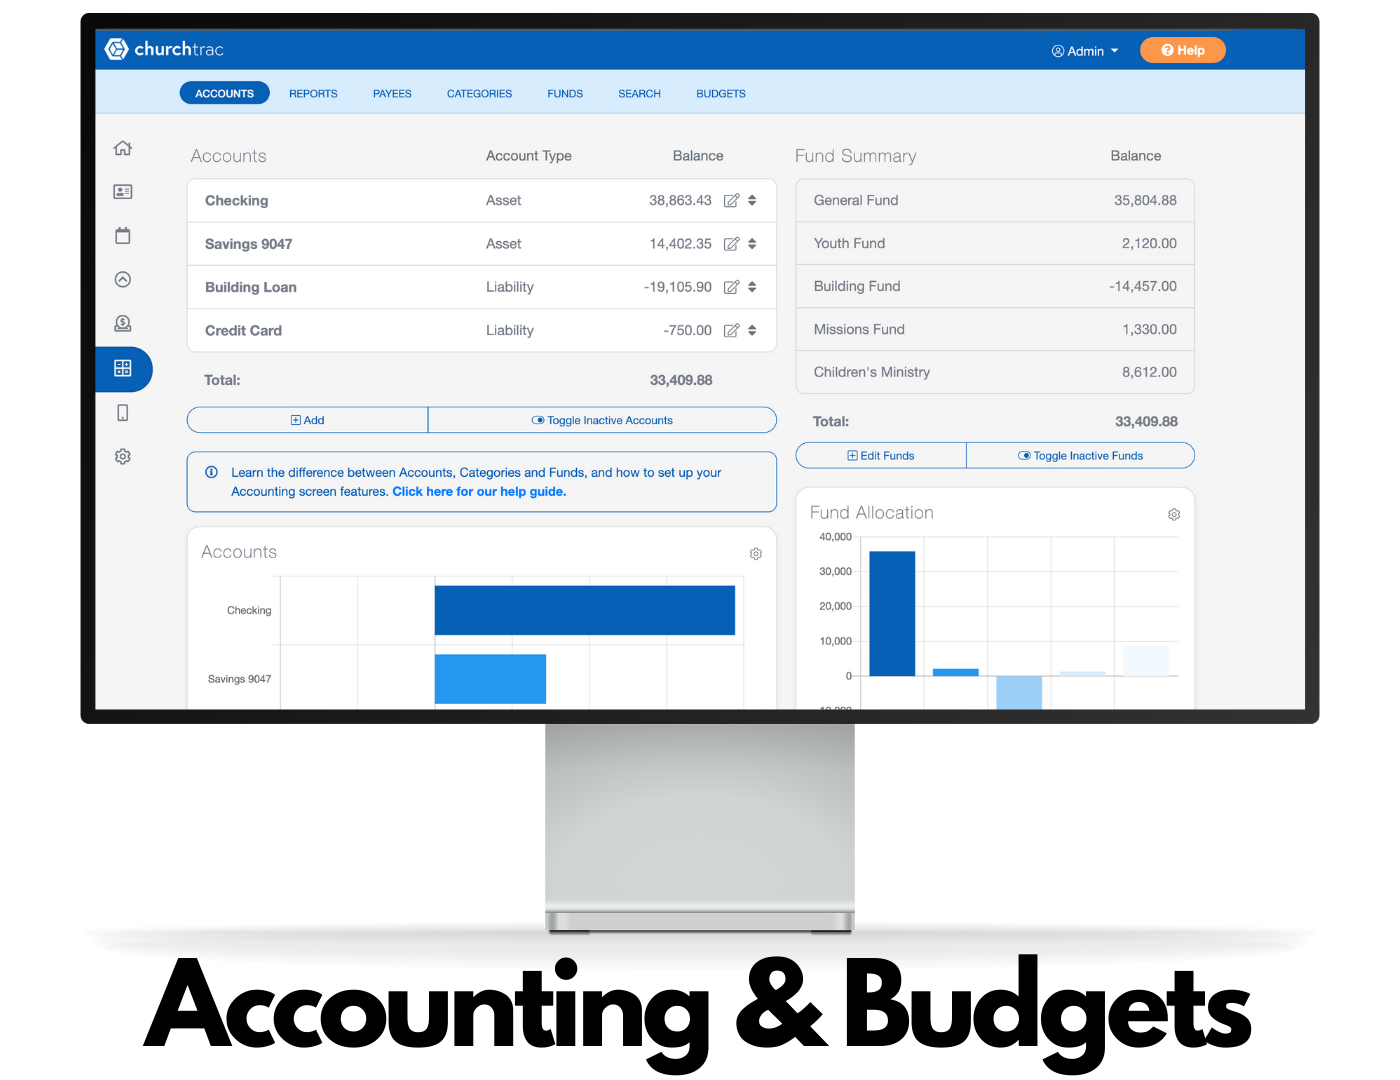 Accounting and Budgets